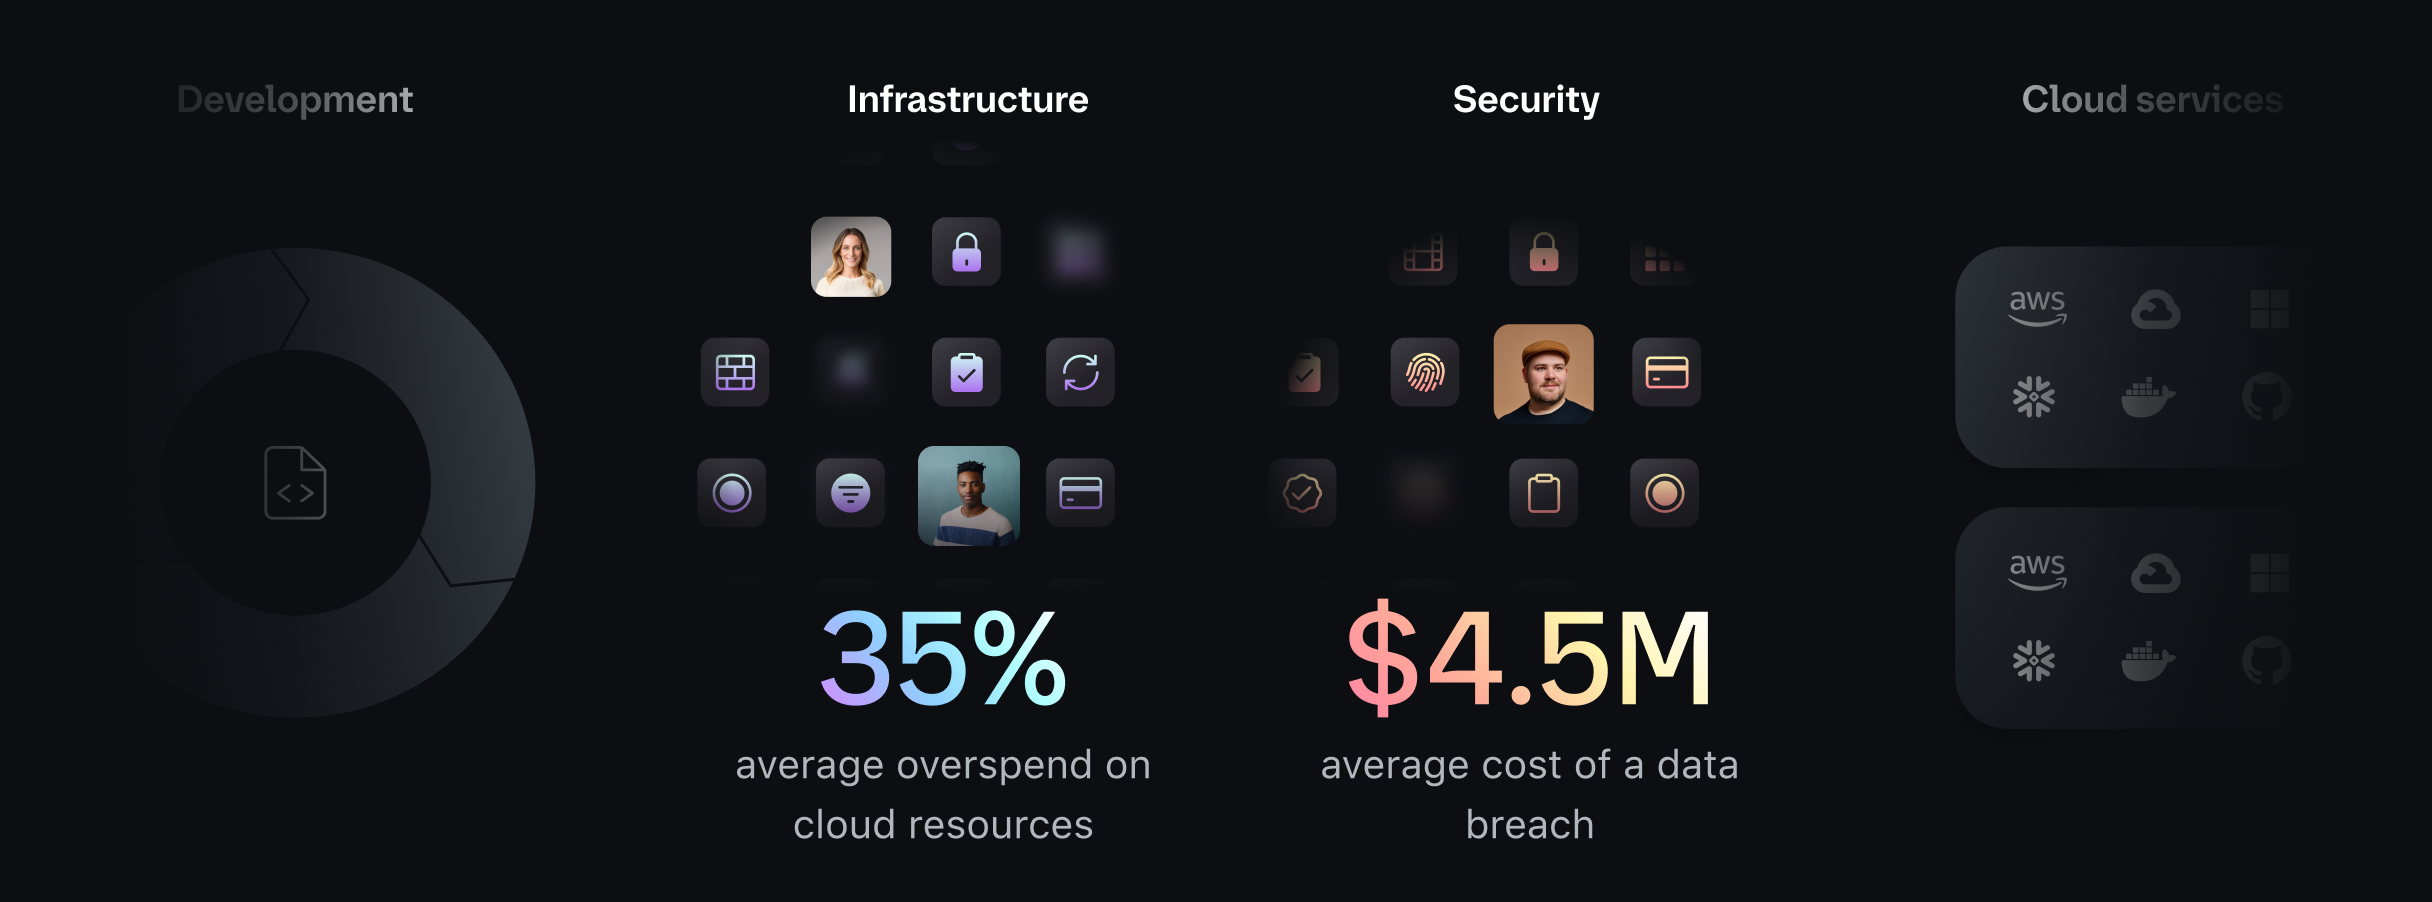 Infrastructure. 35% average overspend on cloud resources. Security. $4.5M average cost of a data breach.